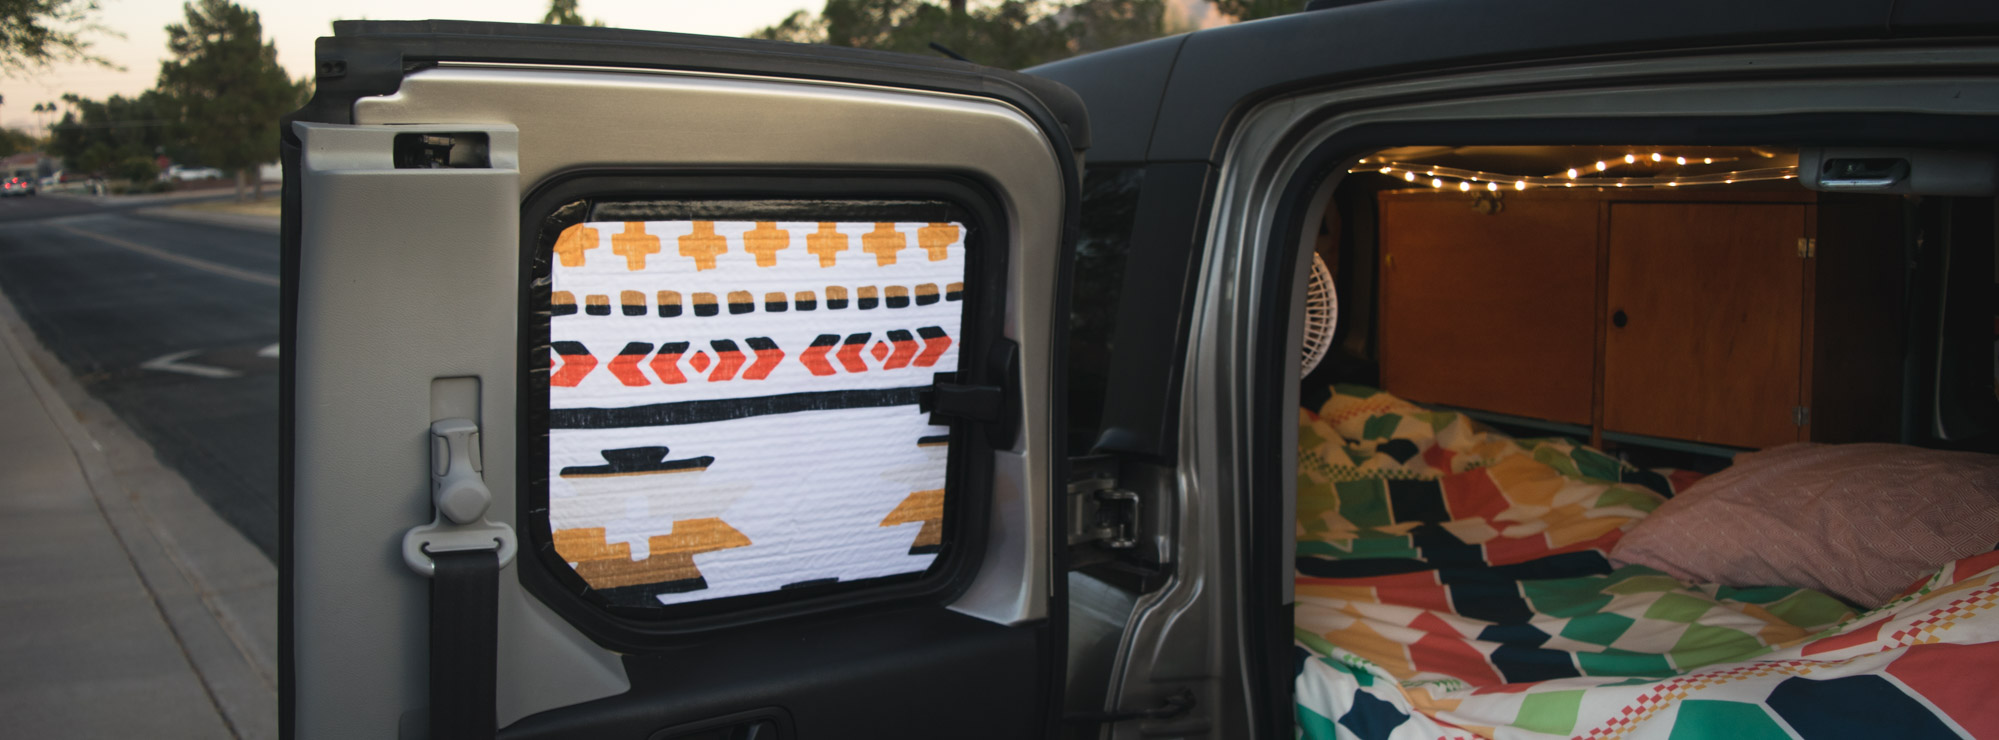 How To Make Beautiful Blackout Window Shades For A Camper